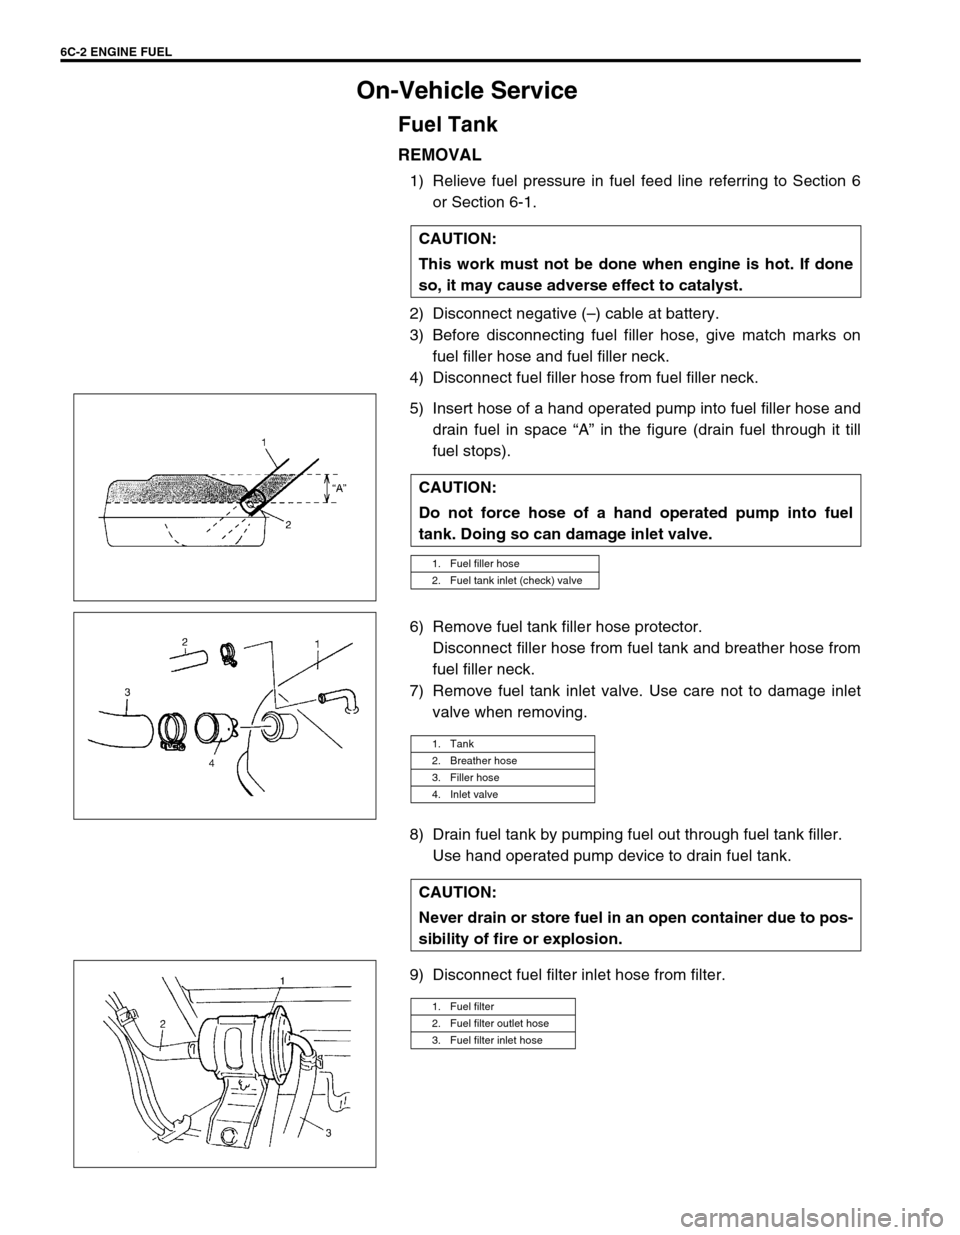 SUZUKI GRAND VITARA 2001 2.G Owners Manual 6C-2 ENGINE FUEL
On-Vehicle Service
Fuel Tank
REMOVAL
1) Relieve fuel pressure in fuel feed line referring to Section 6
or Section 6-1.
2) Disconnect negative (–) cable at battery.
3) Before disconn